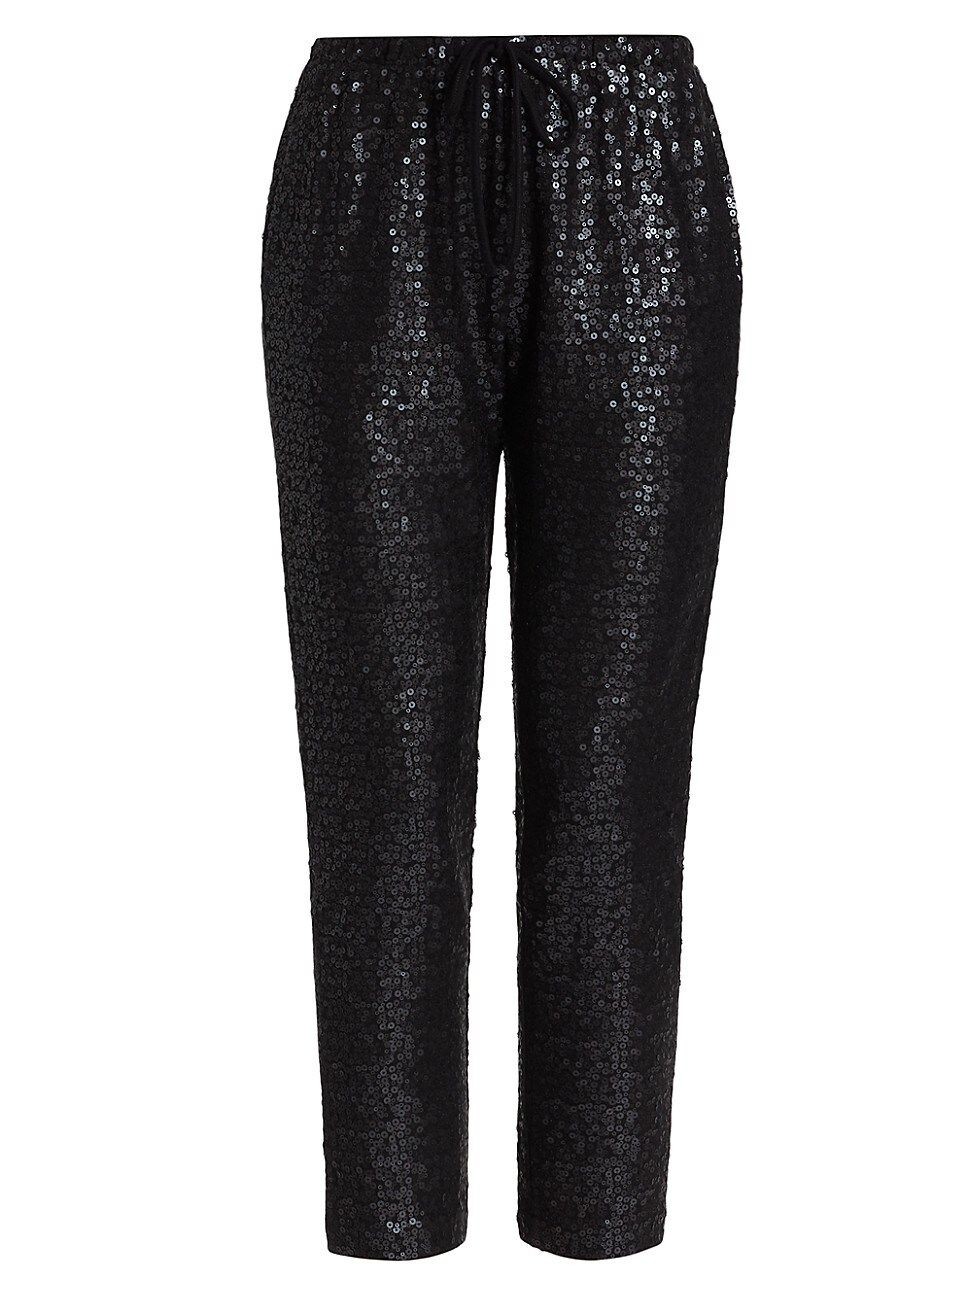 Women's Oxford Sequin Pants - Black - Size Small | Saks Fifth Avenue